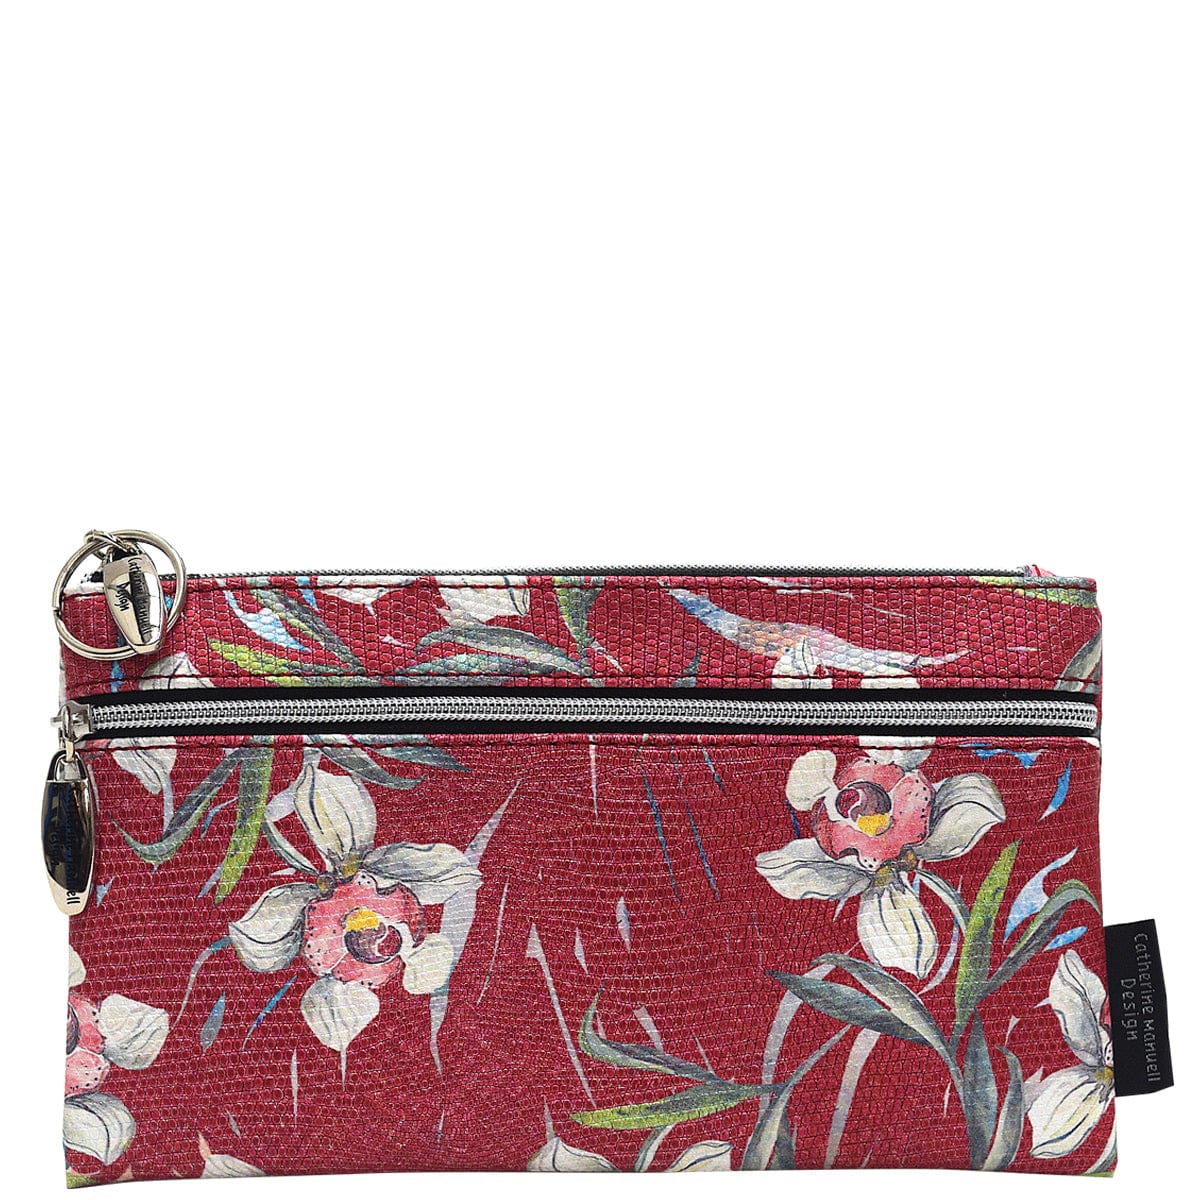 Buy Coin Purse Double Frame with Zipper Pocket (Red) at Amazon.in